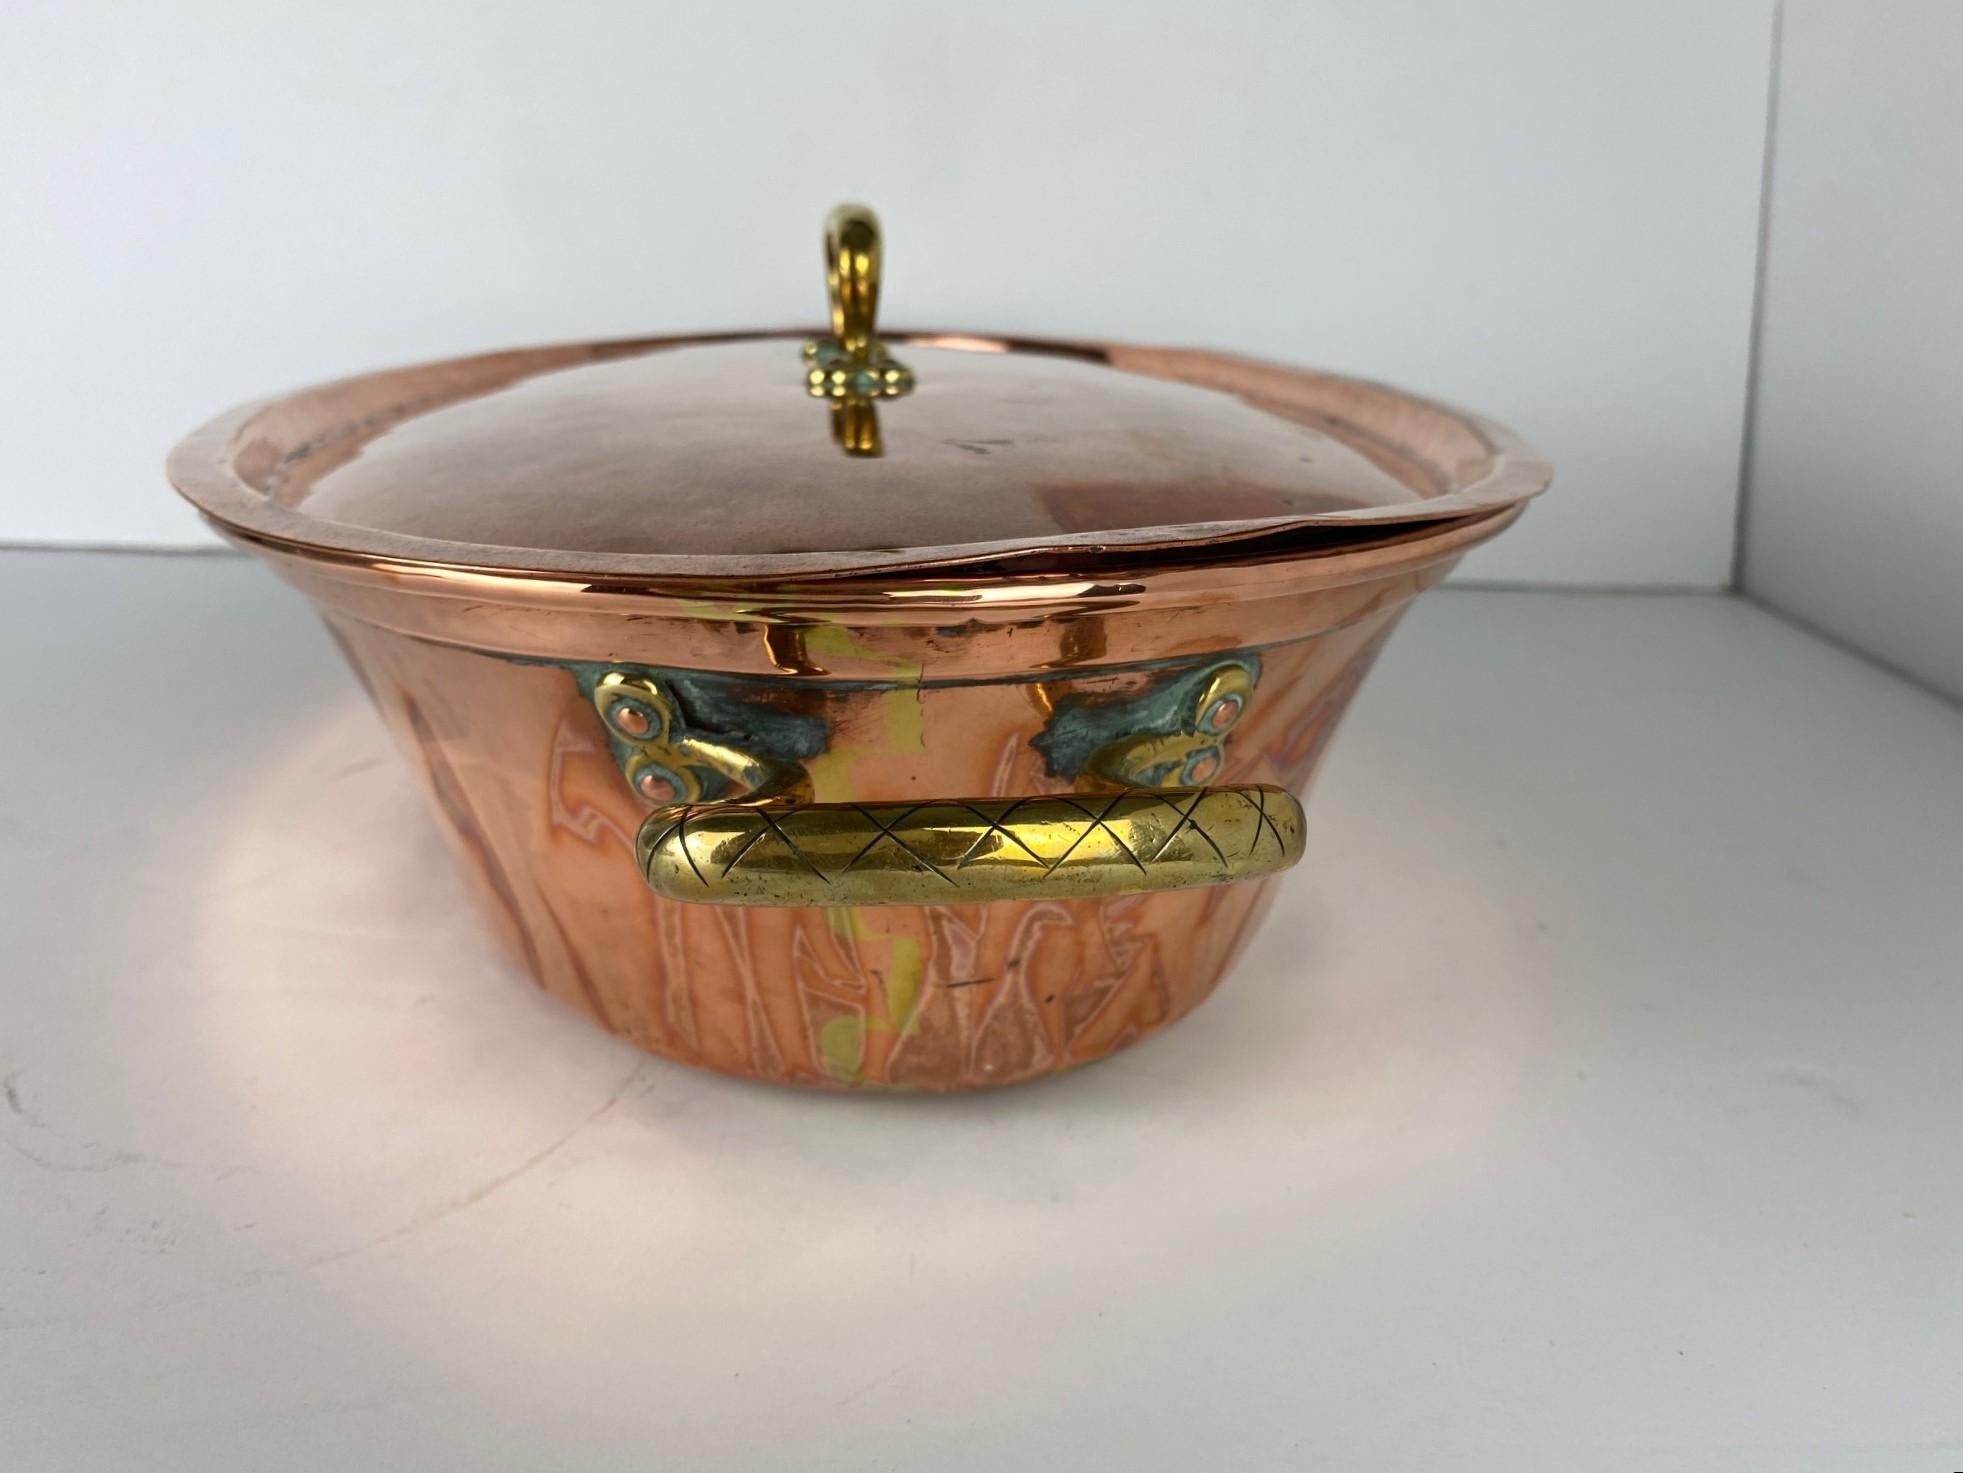 18th century, Marque shape copper pot with a lid.